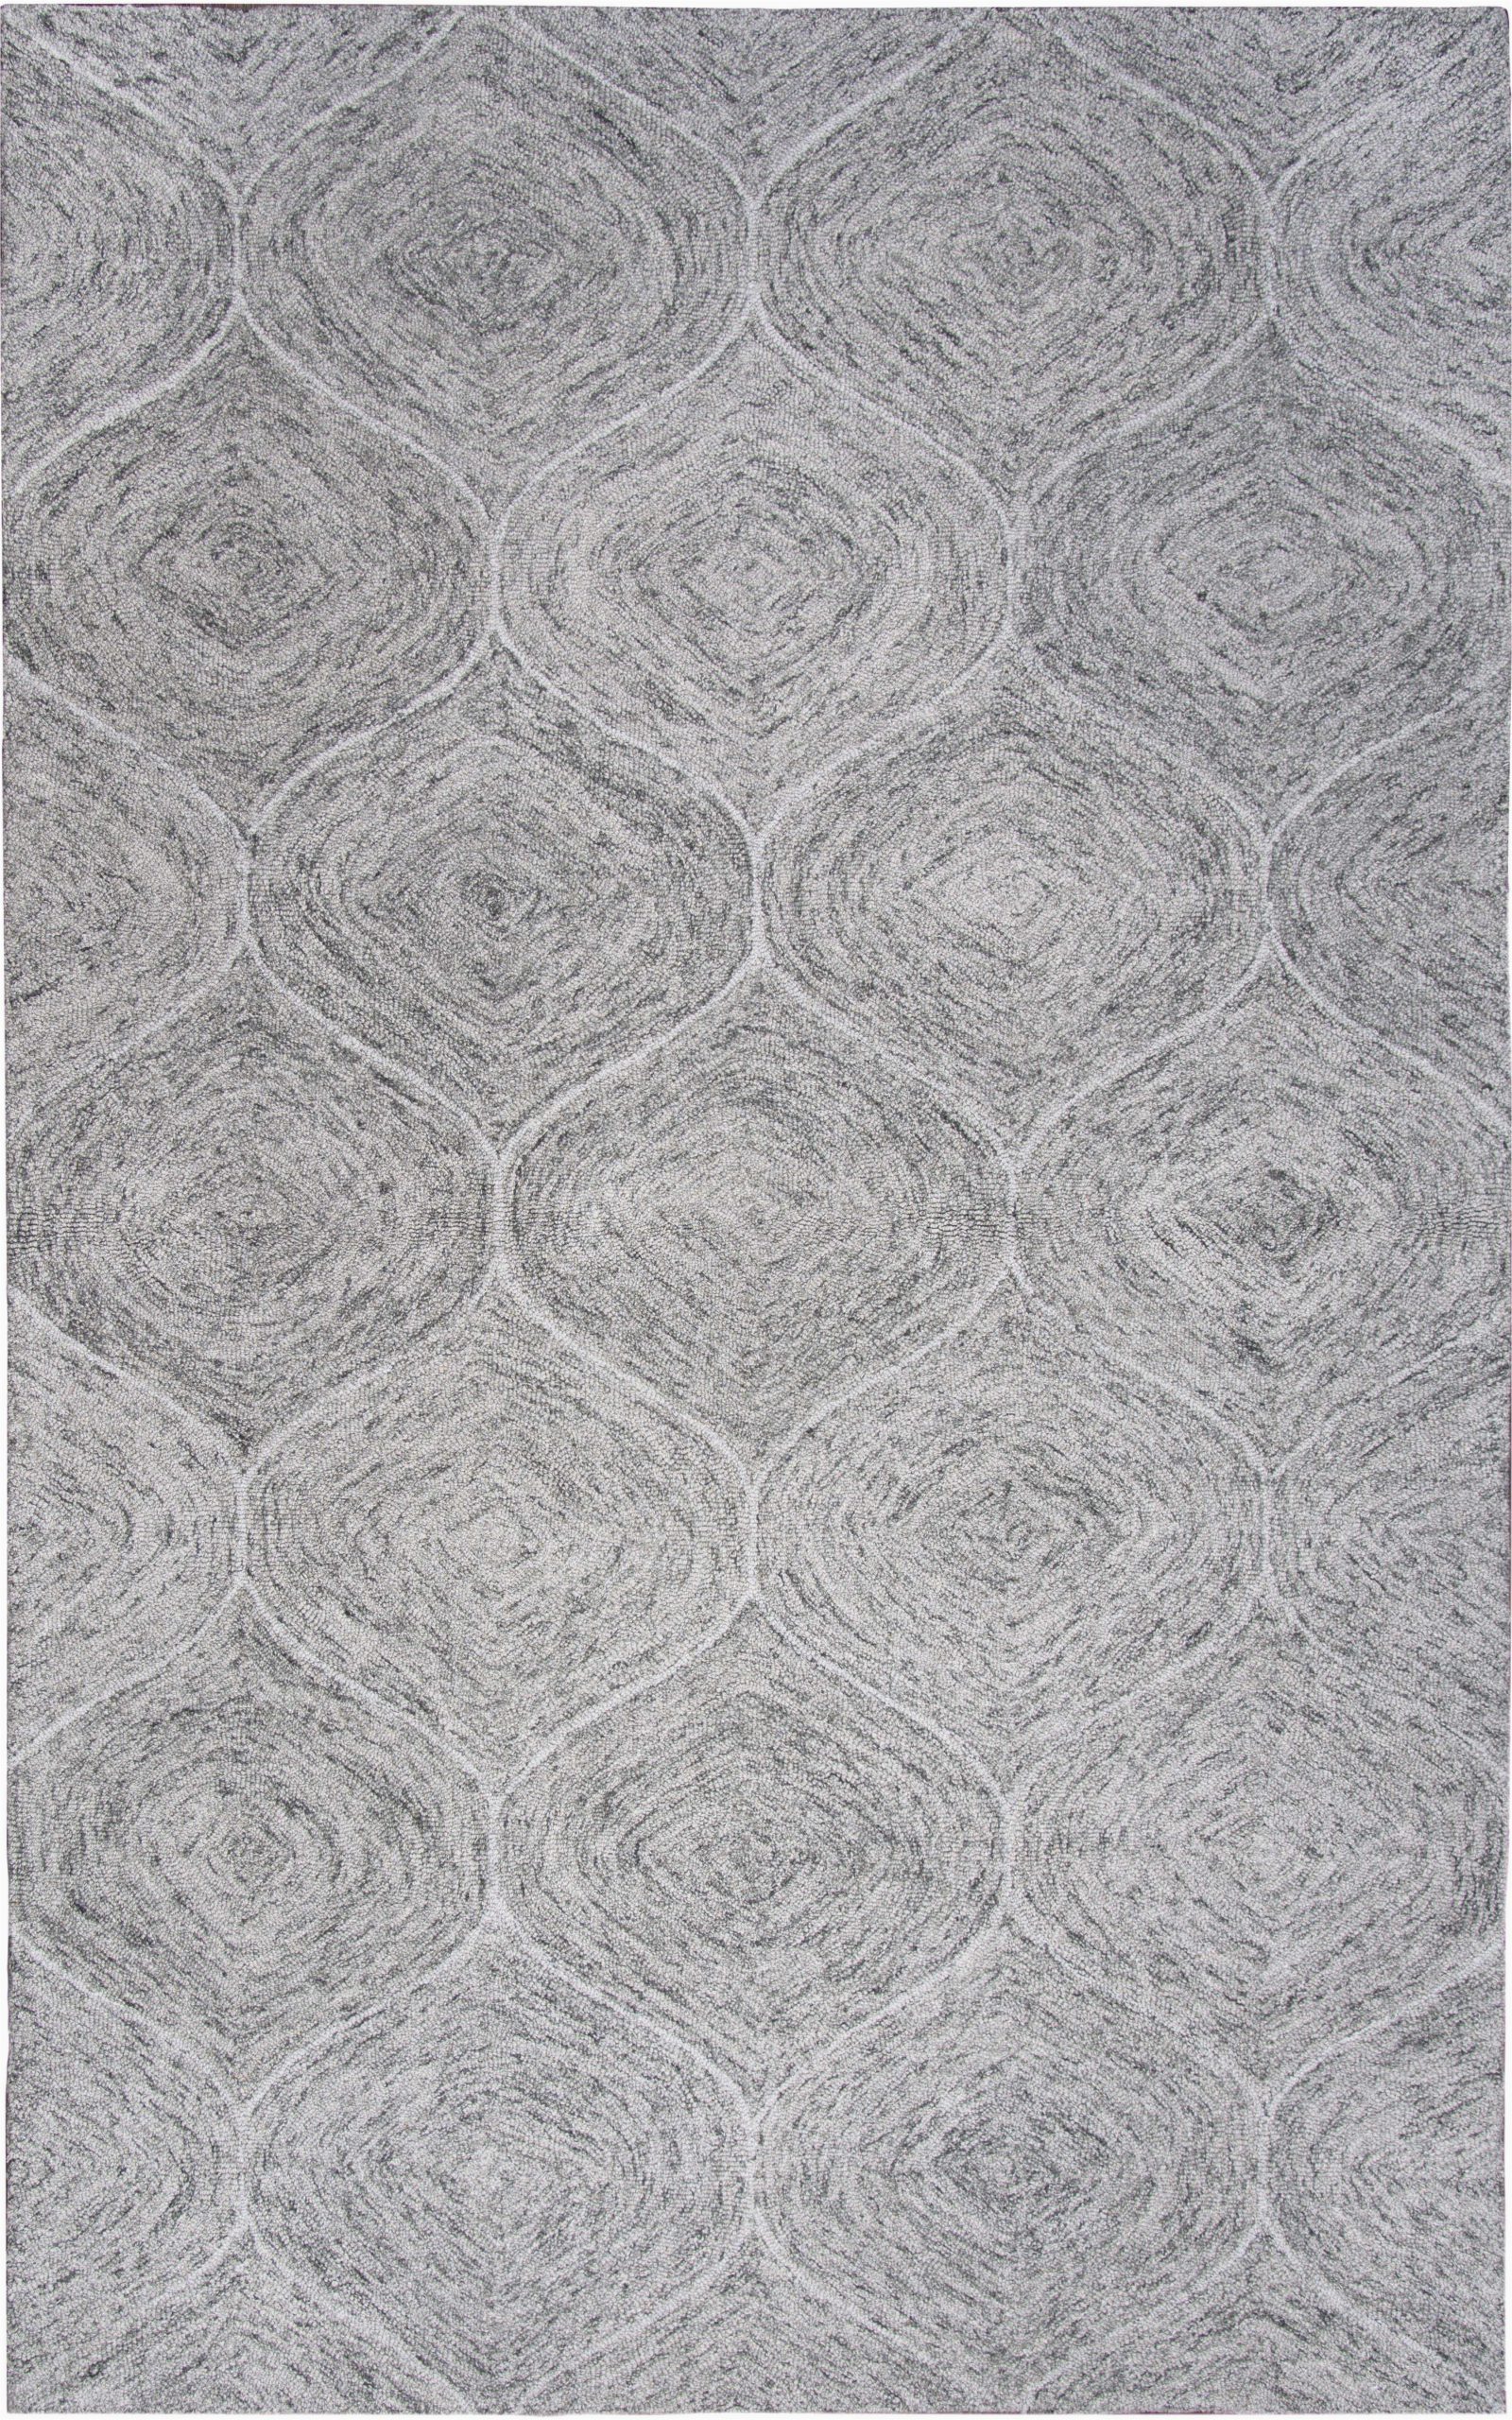 Jeannine Hand Tufted Wool Gray Ivory area Rug Rizzyhome Rugs